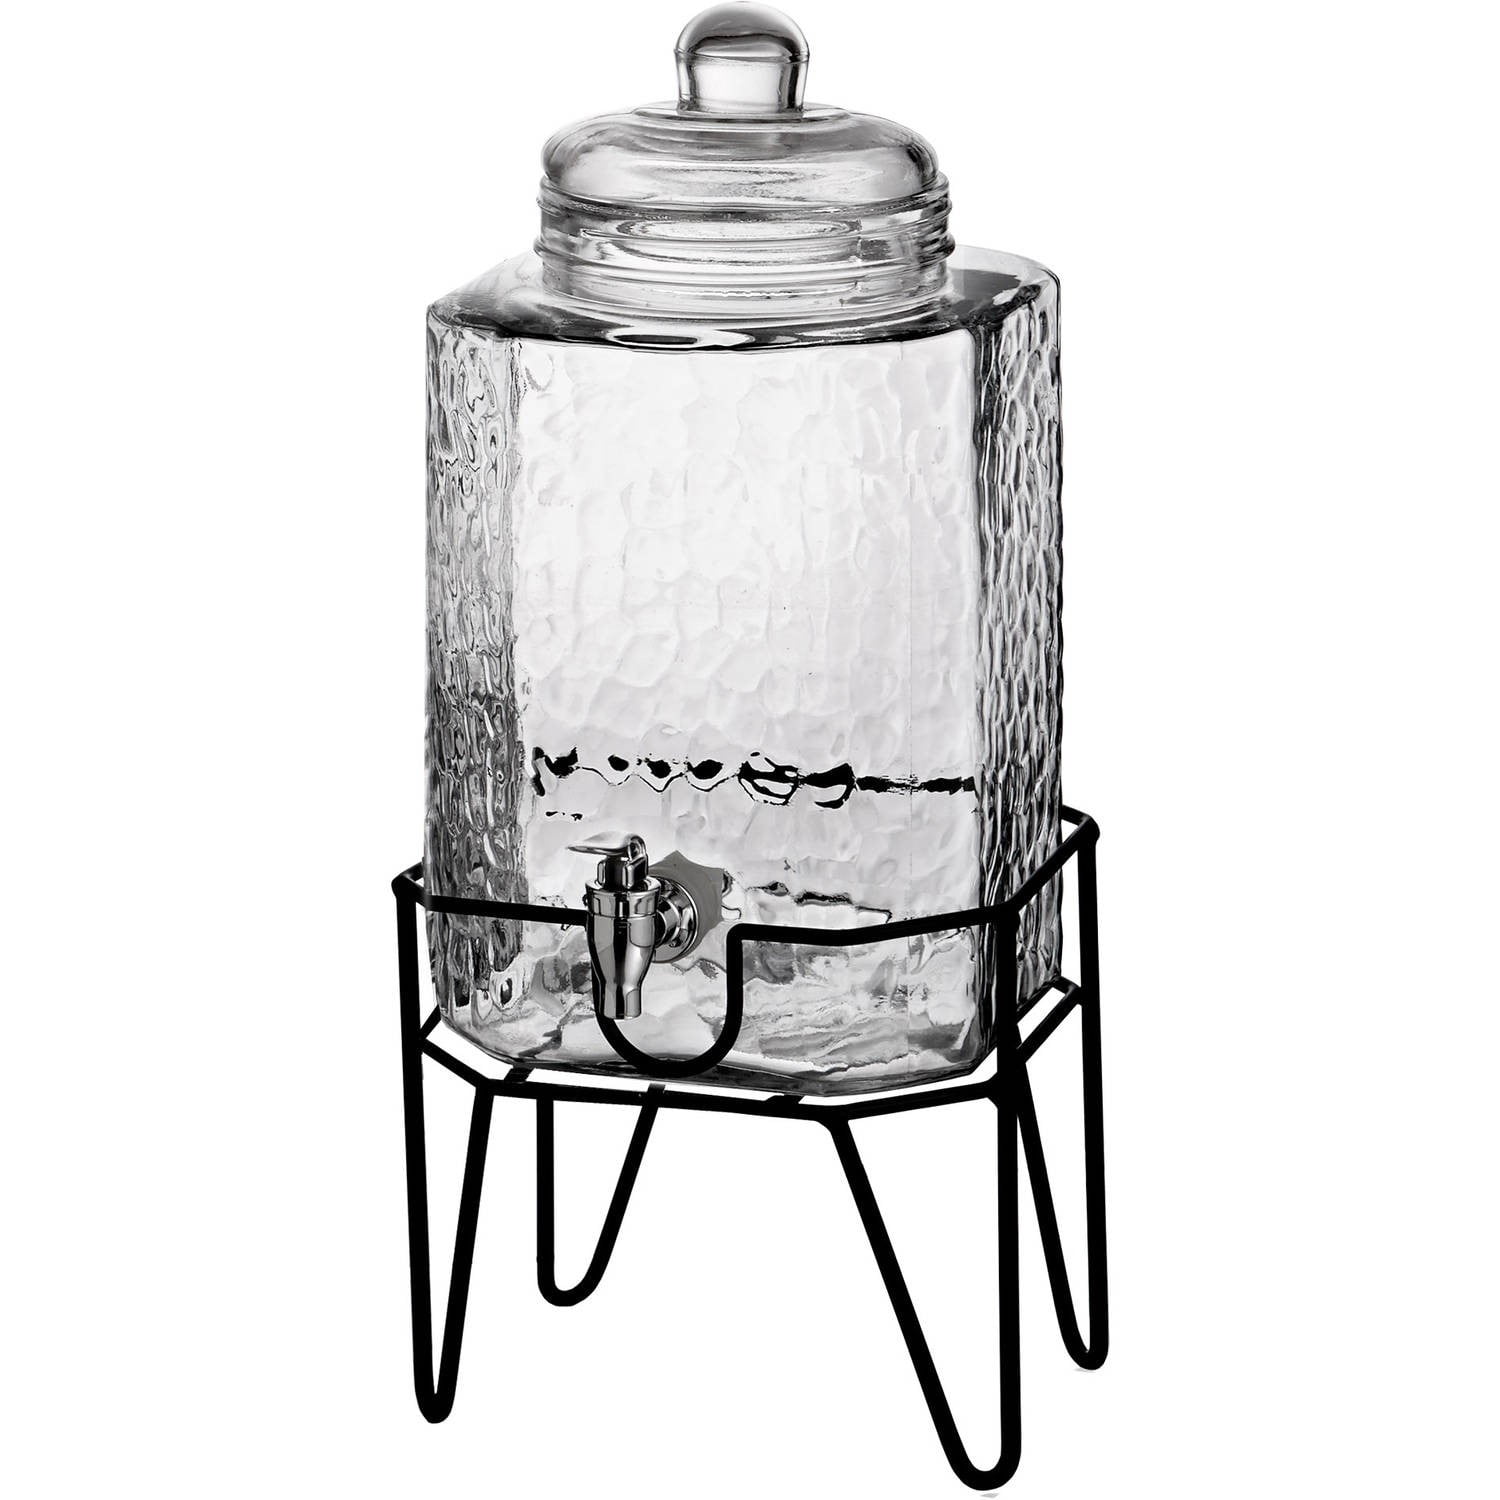 Stylesetter Rustic Home 1 Gallon Double Glass Beverage Dispenser with Black  Metal Stand by Jay Companies